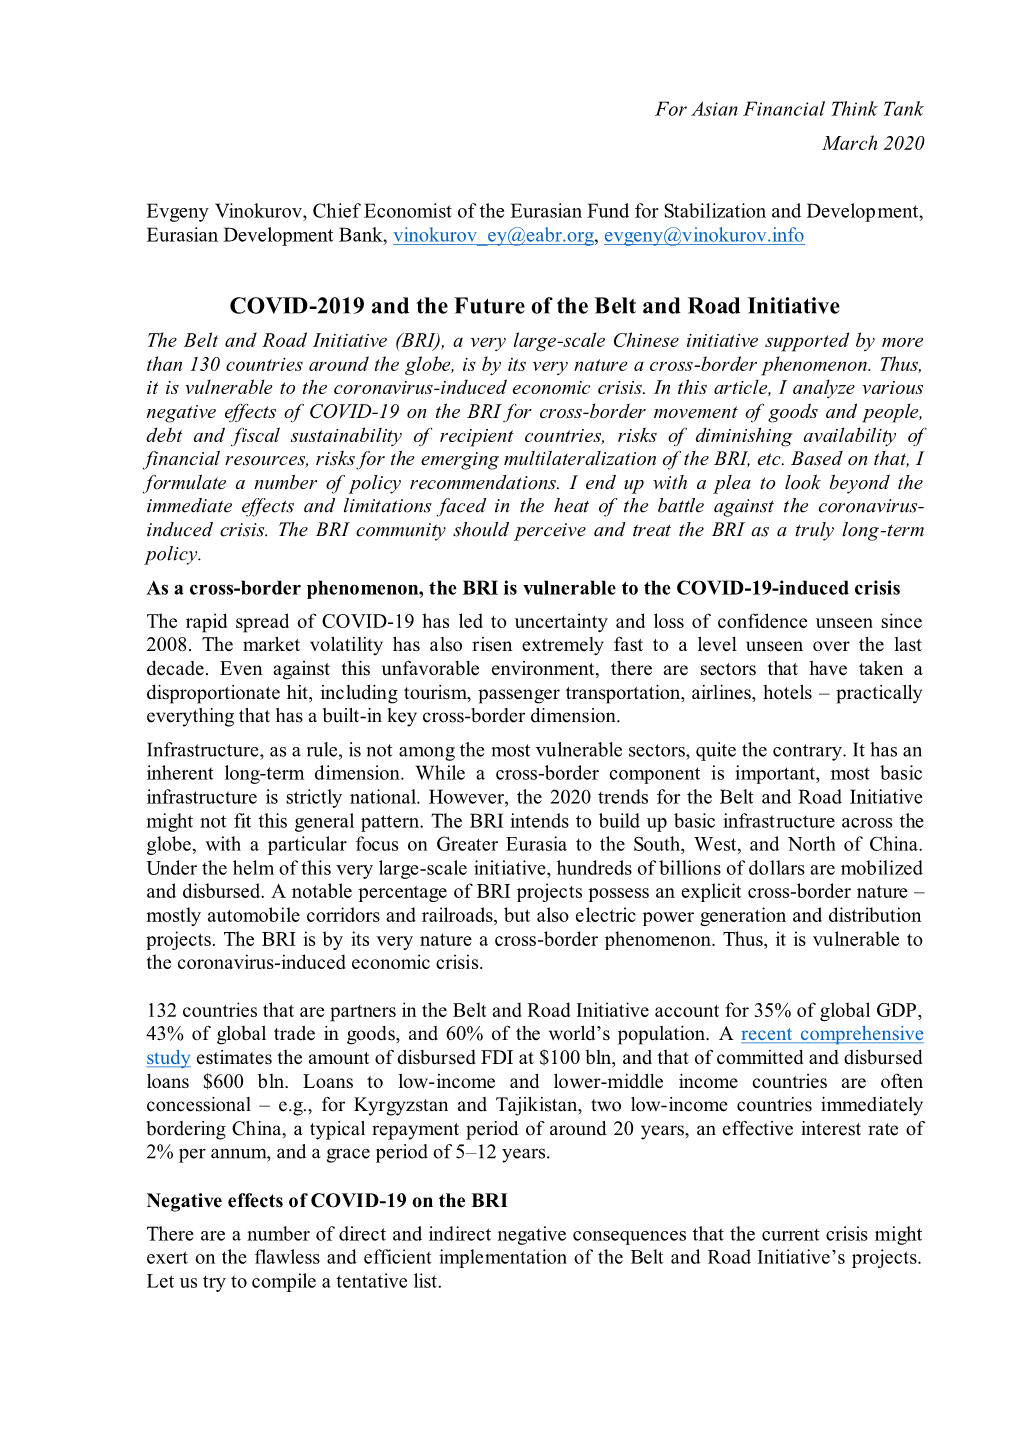 COVID-2019 and the Future of the Belt and Road Initiative